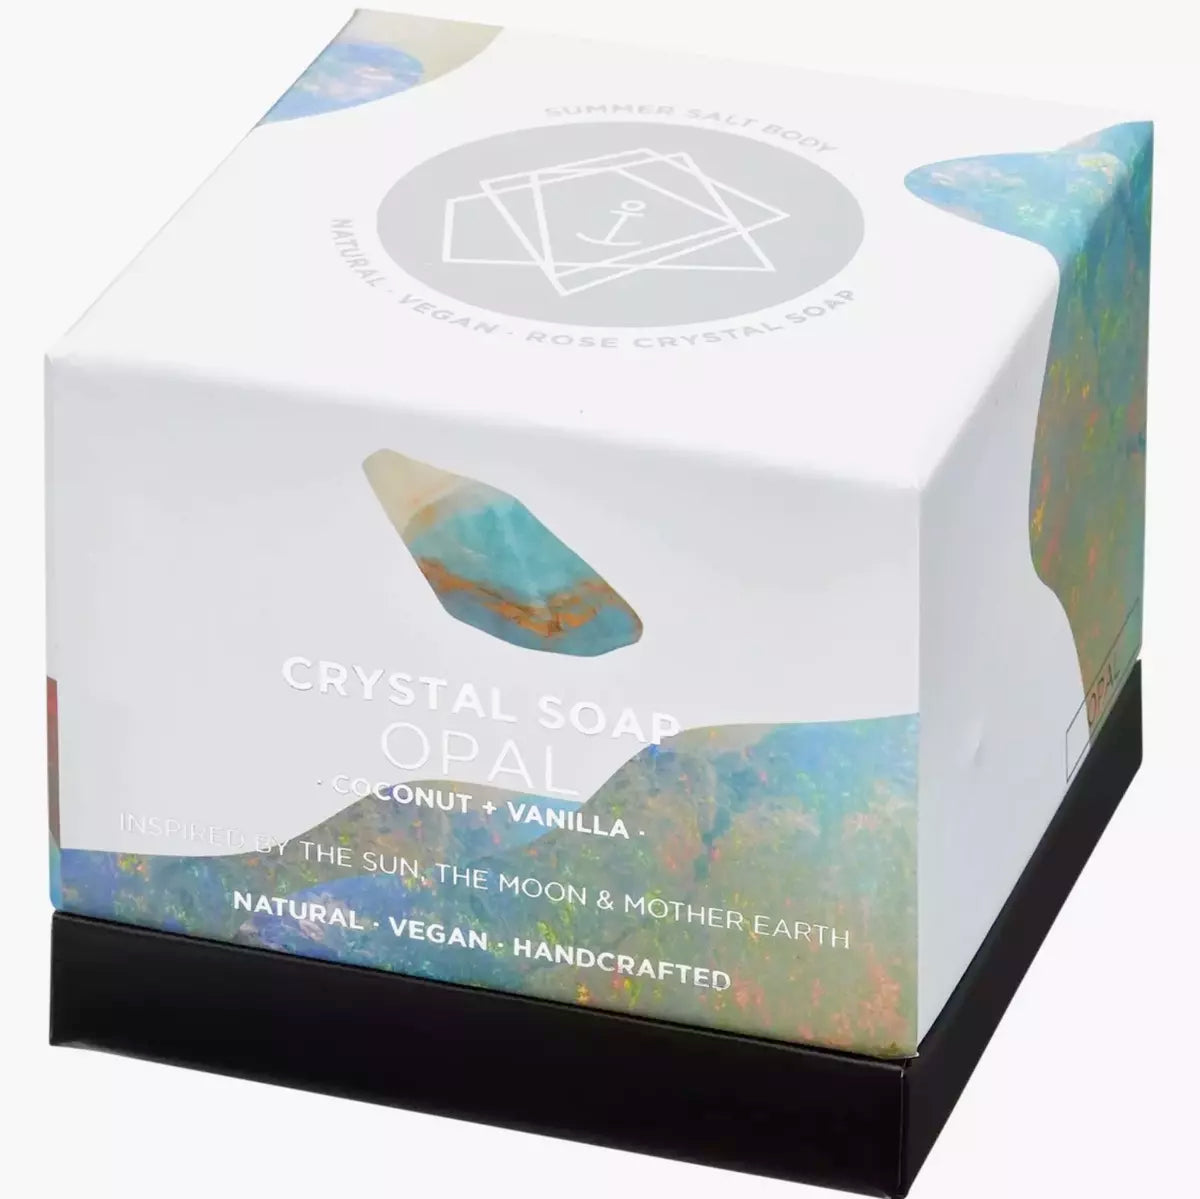 Summer Salt Body's Crystal Soap - OPAL - Coconut + Vanilla in a white box, perfect for skincare.